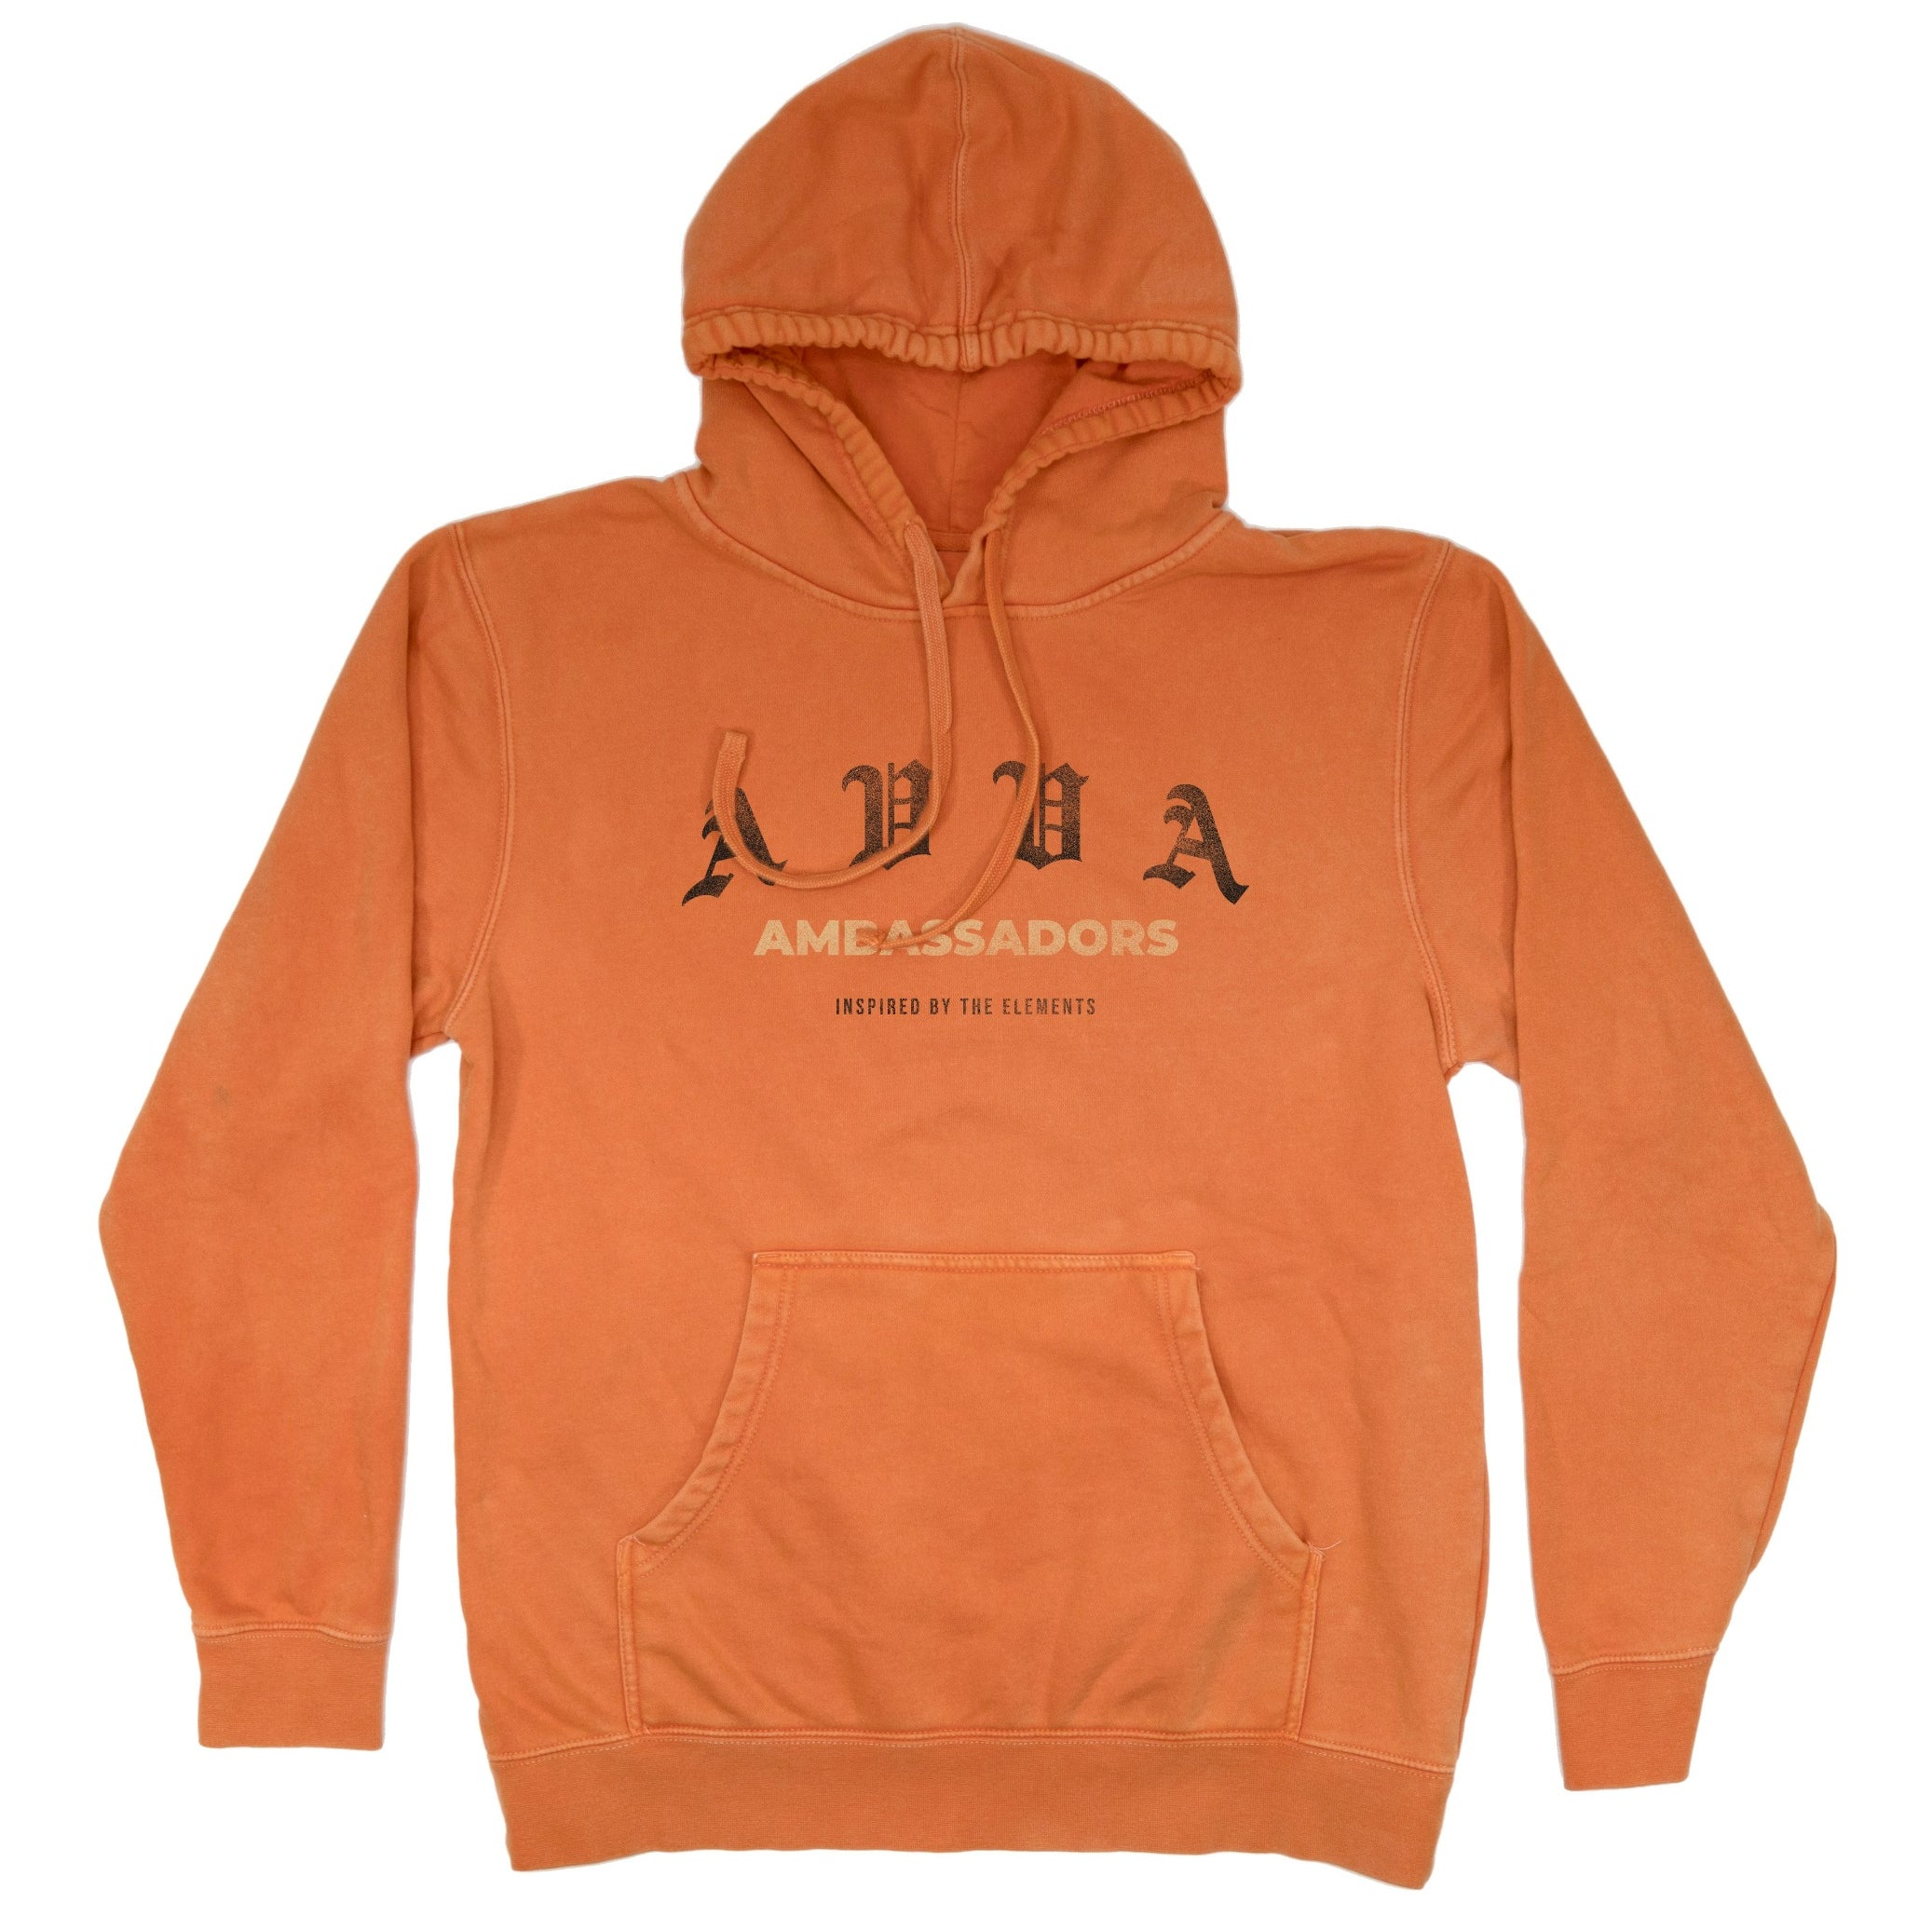 FRONT VIEW OF AVVA ORANGE LAVA FLEECE HOODIE WITH A AVVA AMBASSADORS INSPIRED BY THE ELEMENTS LOGO IN THE MIDDLE.